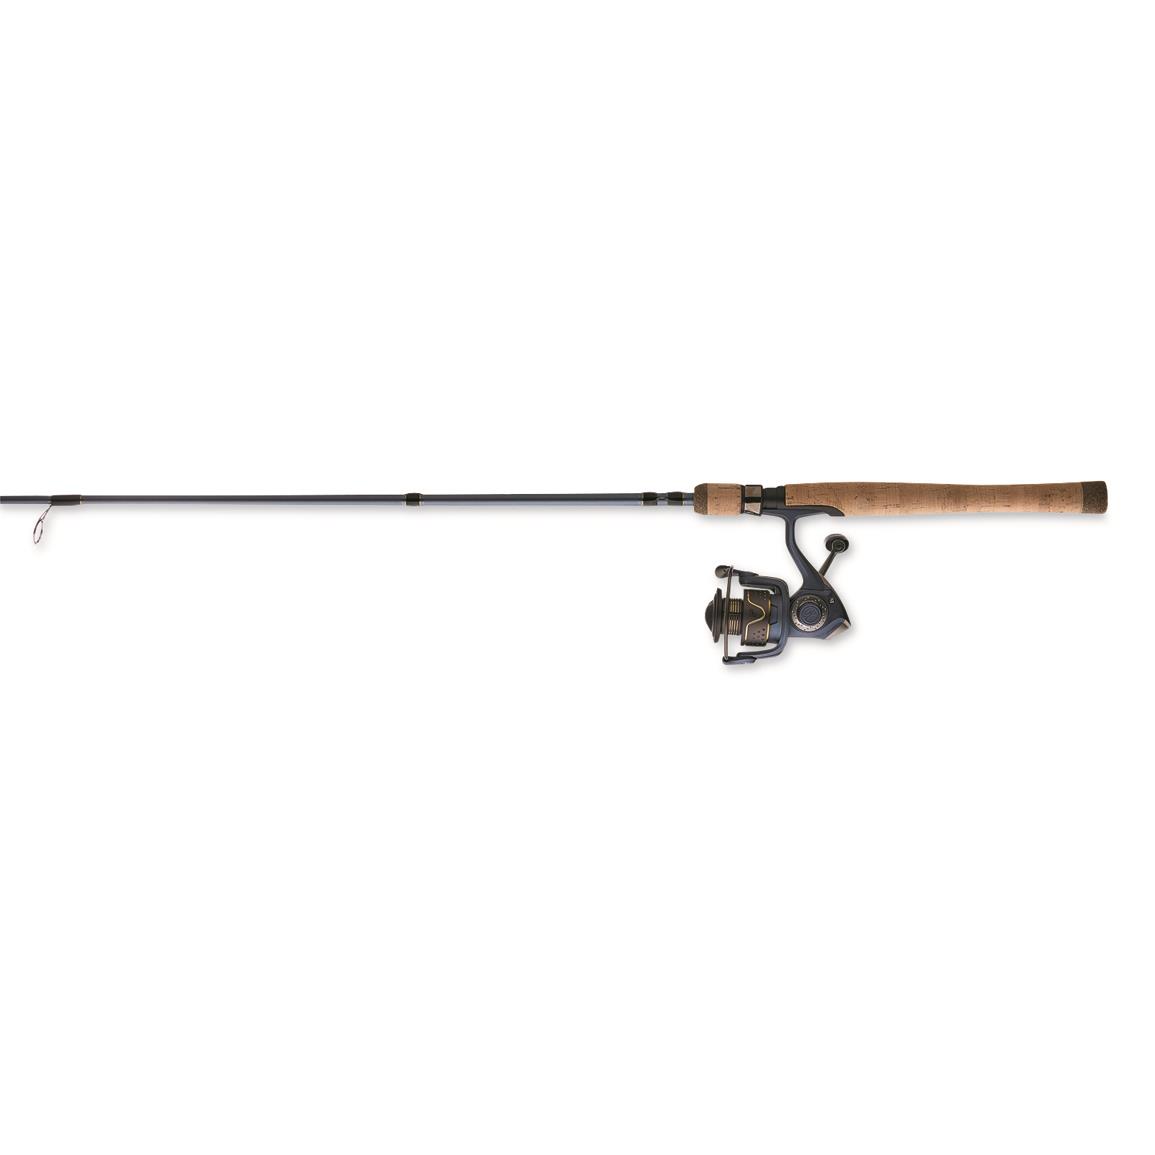 Zebco Crappie Fighter Triggerspin Spincast Combo - 21-36080